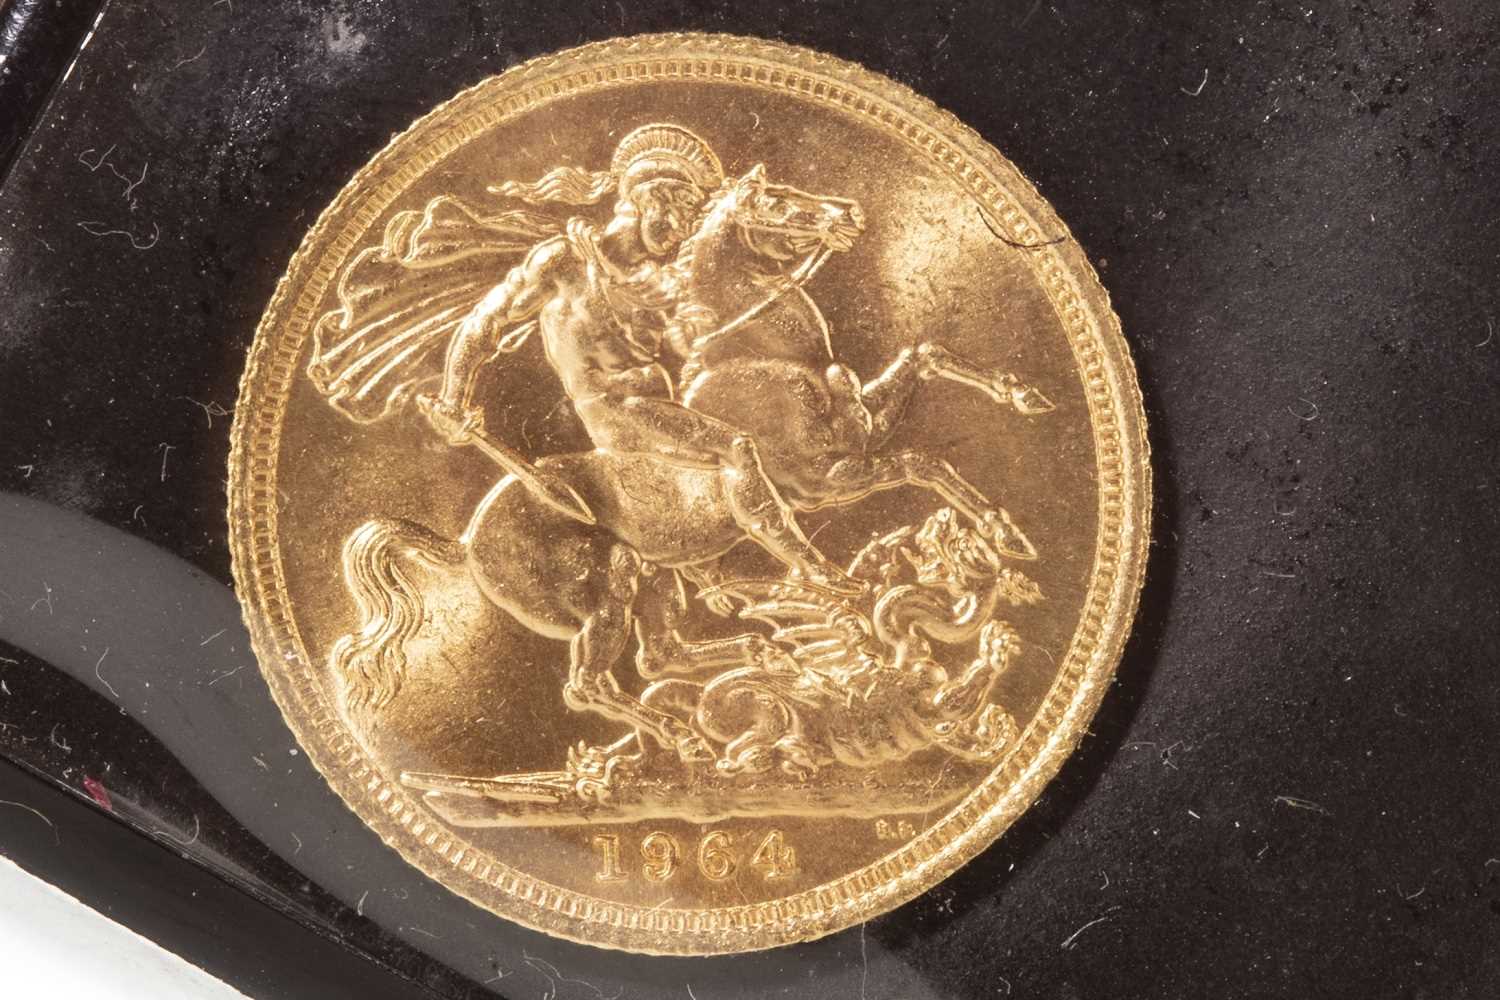 Lot 544 - A GOLD SOVEREIGN, 1964